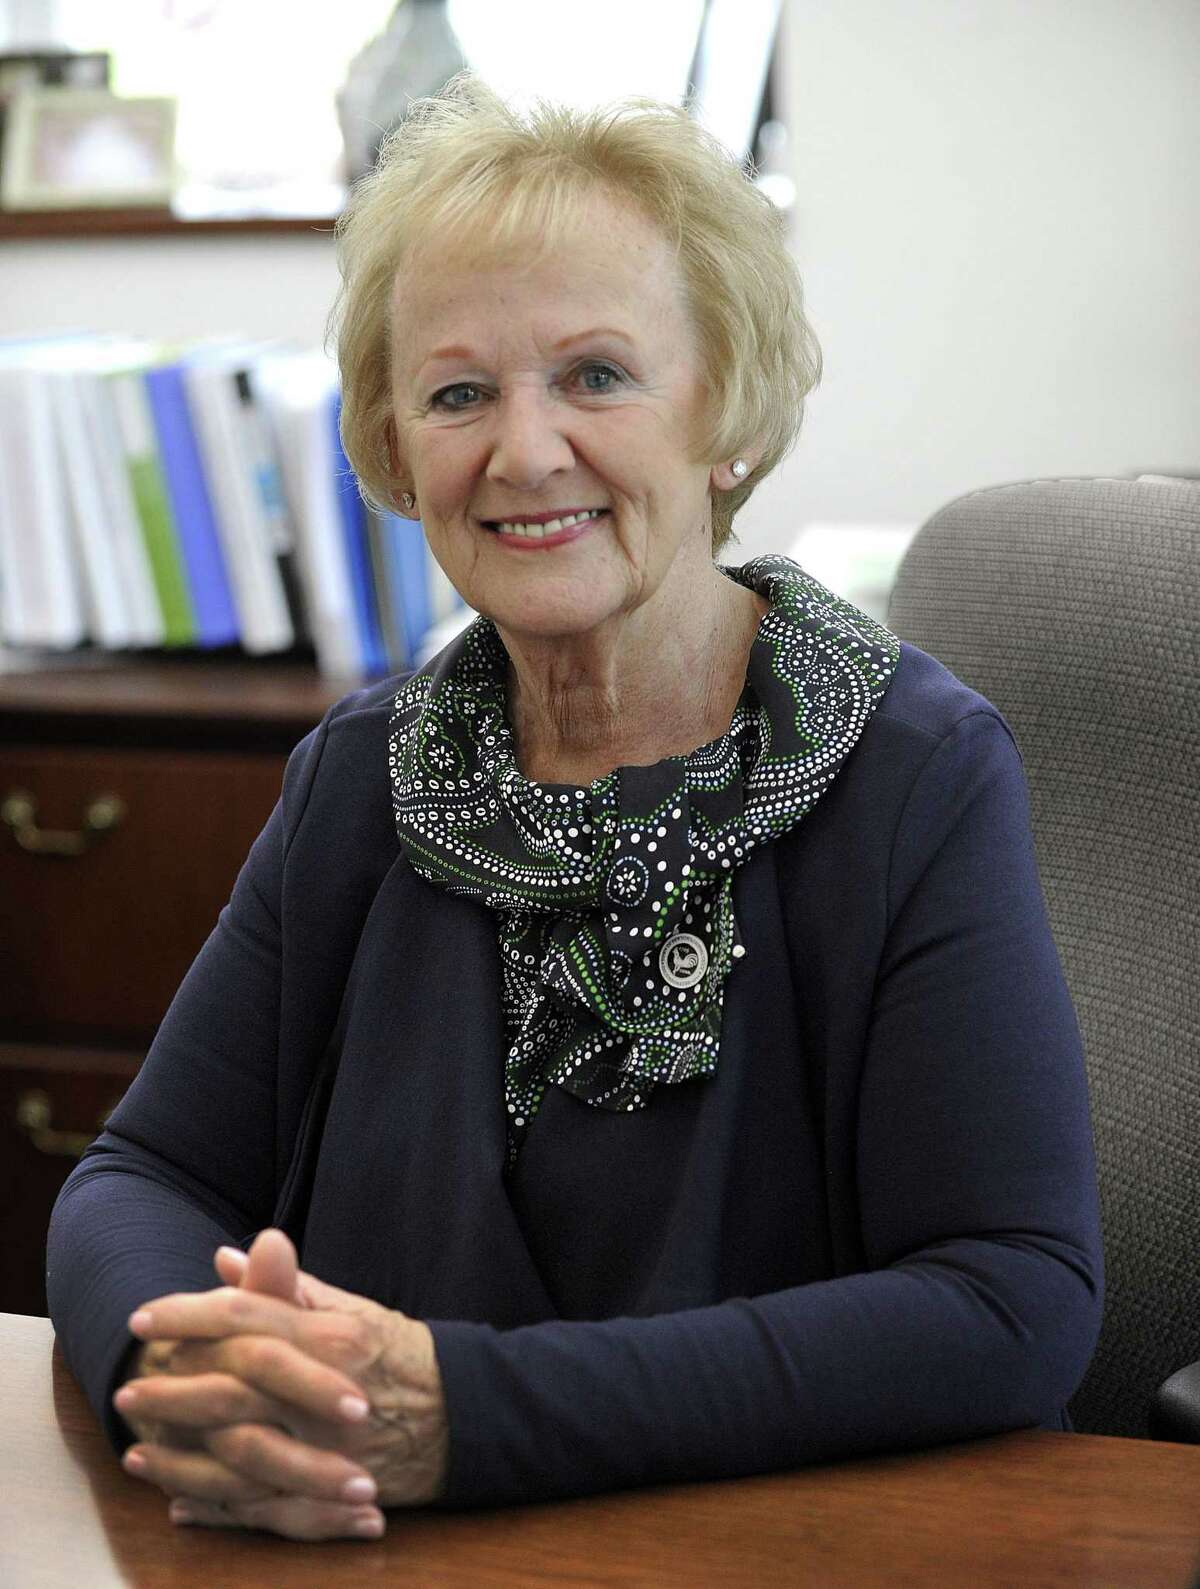 Newtown First Selectman Pat Llodra, who will be retiring when her term ends in November, talks about her time in office, Friday, May 26, 2017.